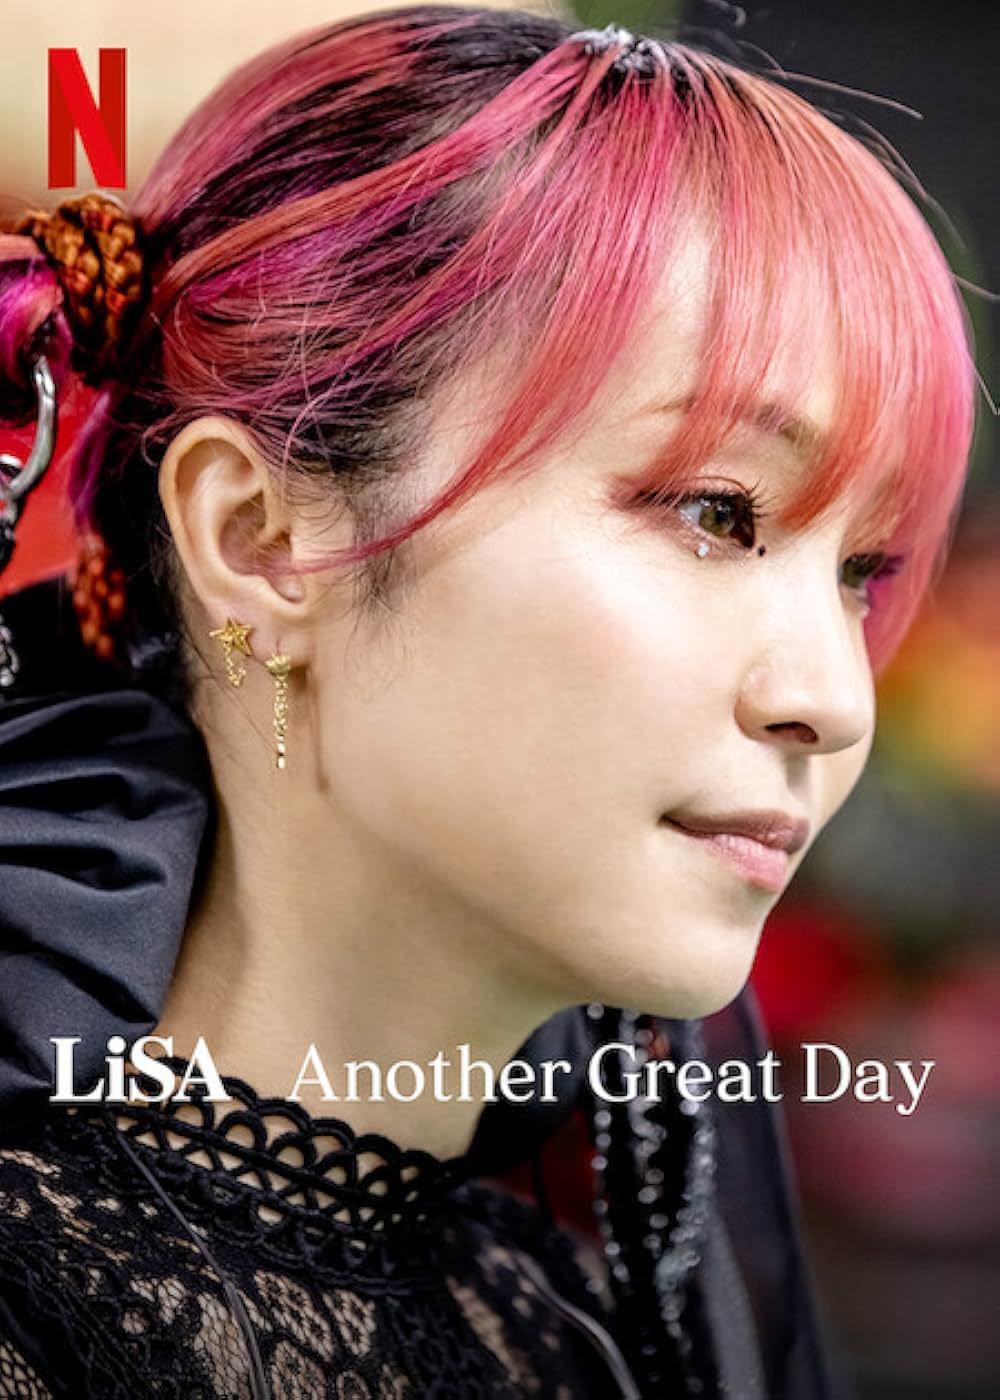 「LiSA Another Great Day」の画像